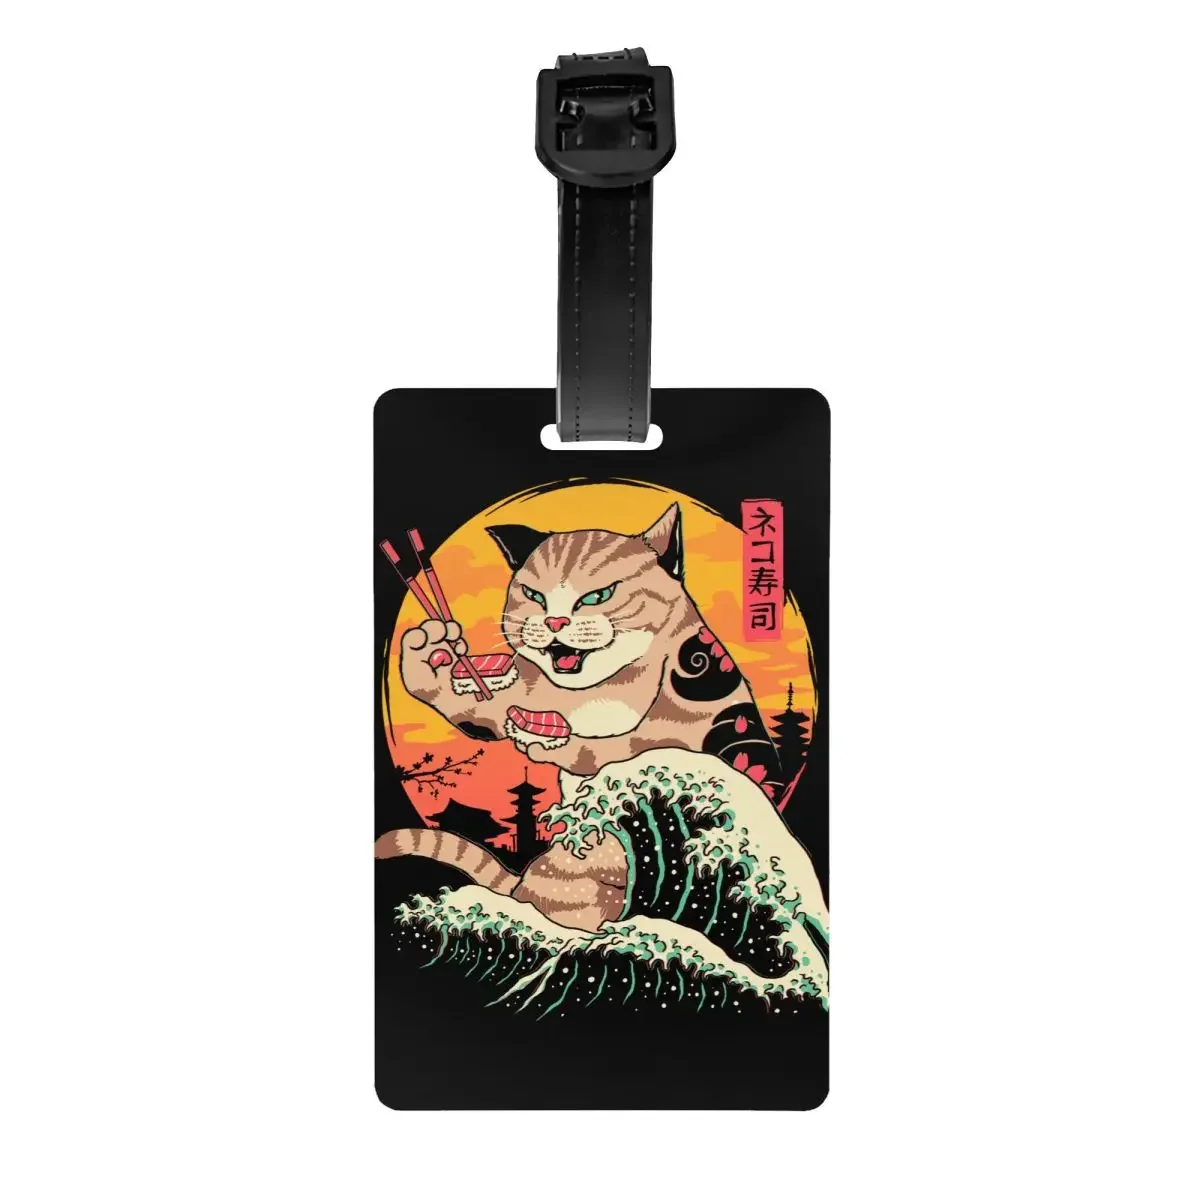 

Japanese Cat Luggage Tags for Suitcases Cute Neko Sushi Kanagawa Wave Baggage Tags Privacy Cover ID Label